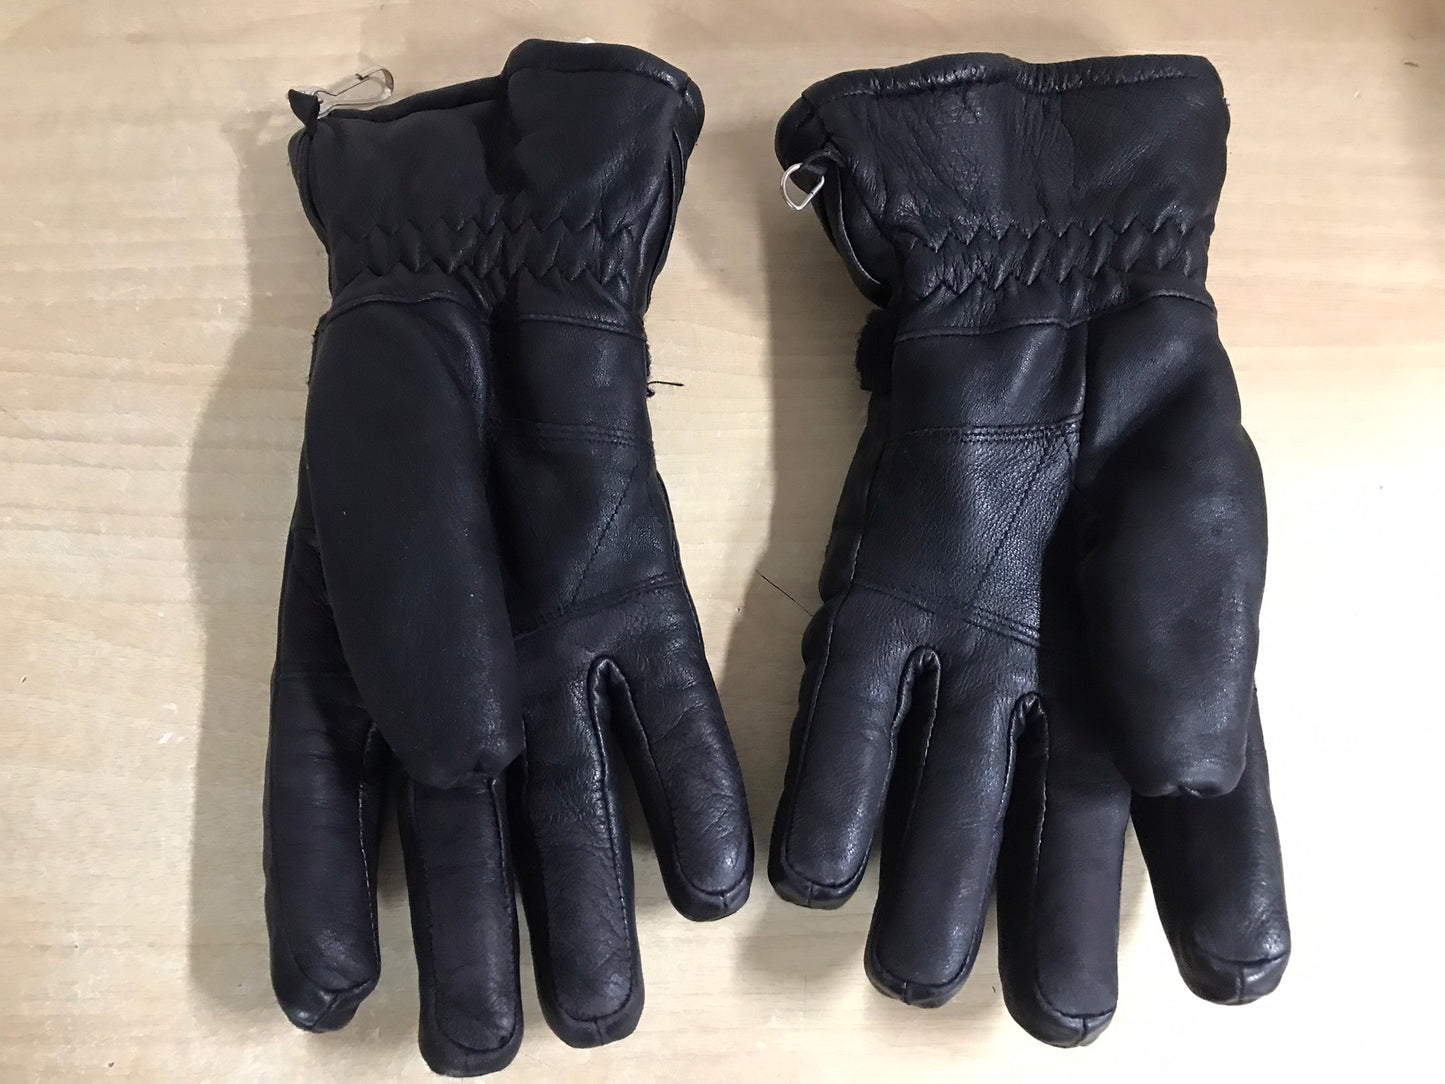 Winter Gloves and Mitts Men's Size Medium Level Leather with Winter Liner Outstanding Quality